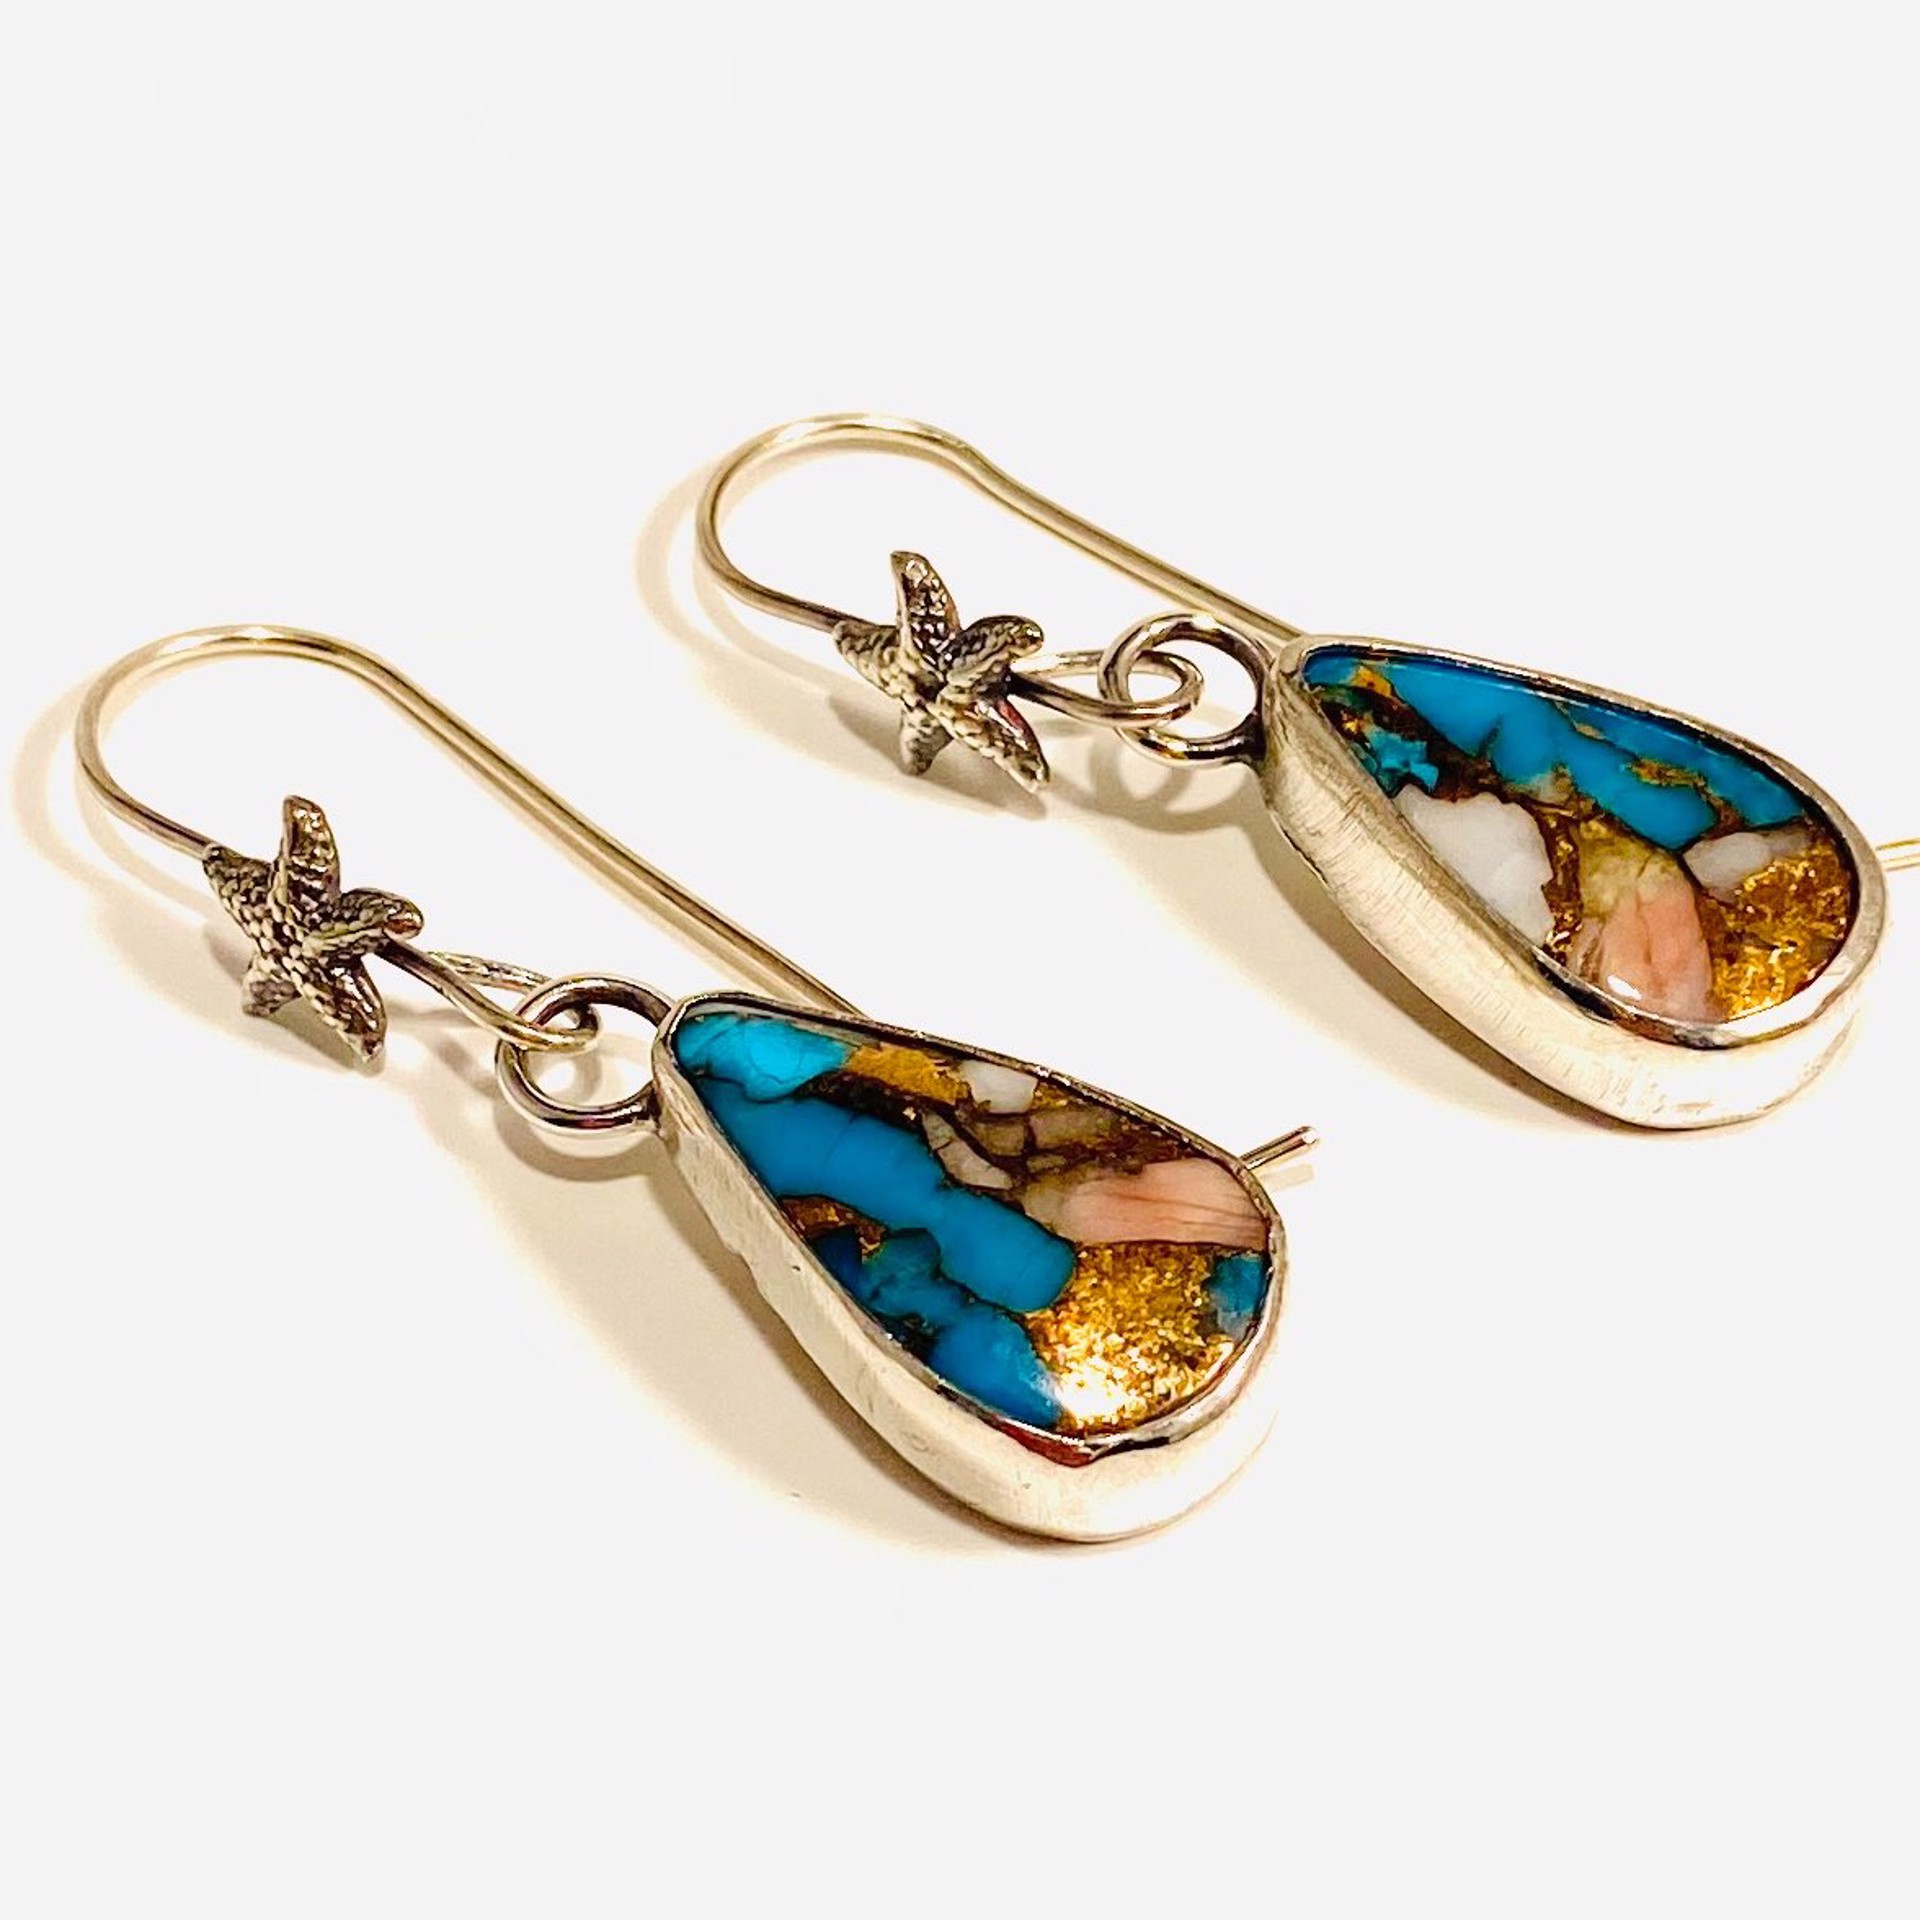 Kingsman Turquoise, Peruvian Opal and Bronze Composite in Silver, Starfish Accent Earrings AB21-27 by Anne Bivens